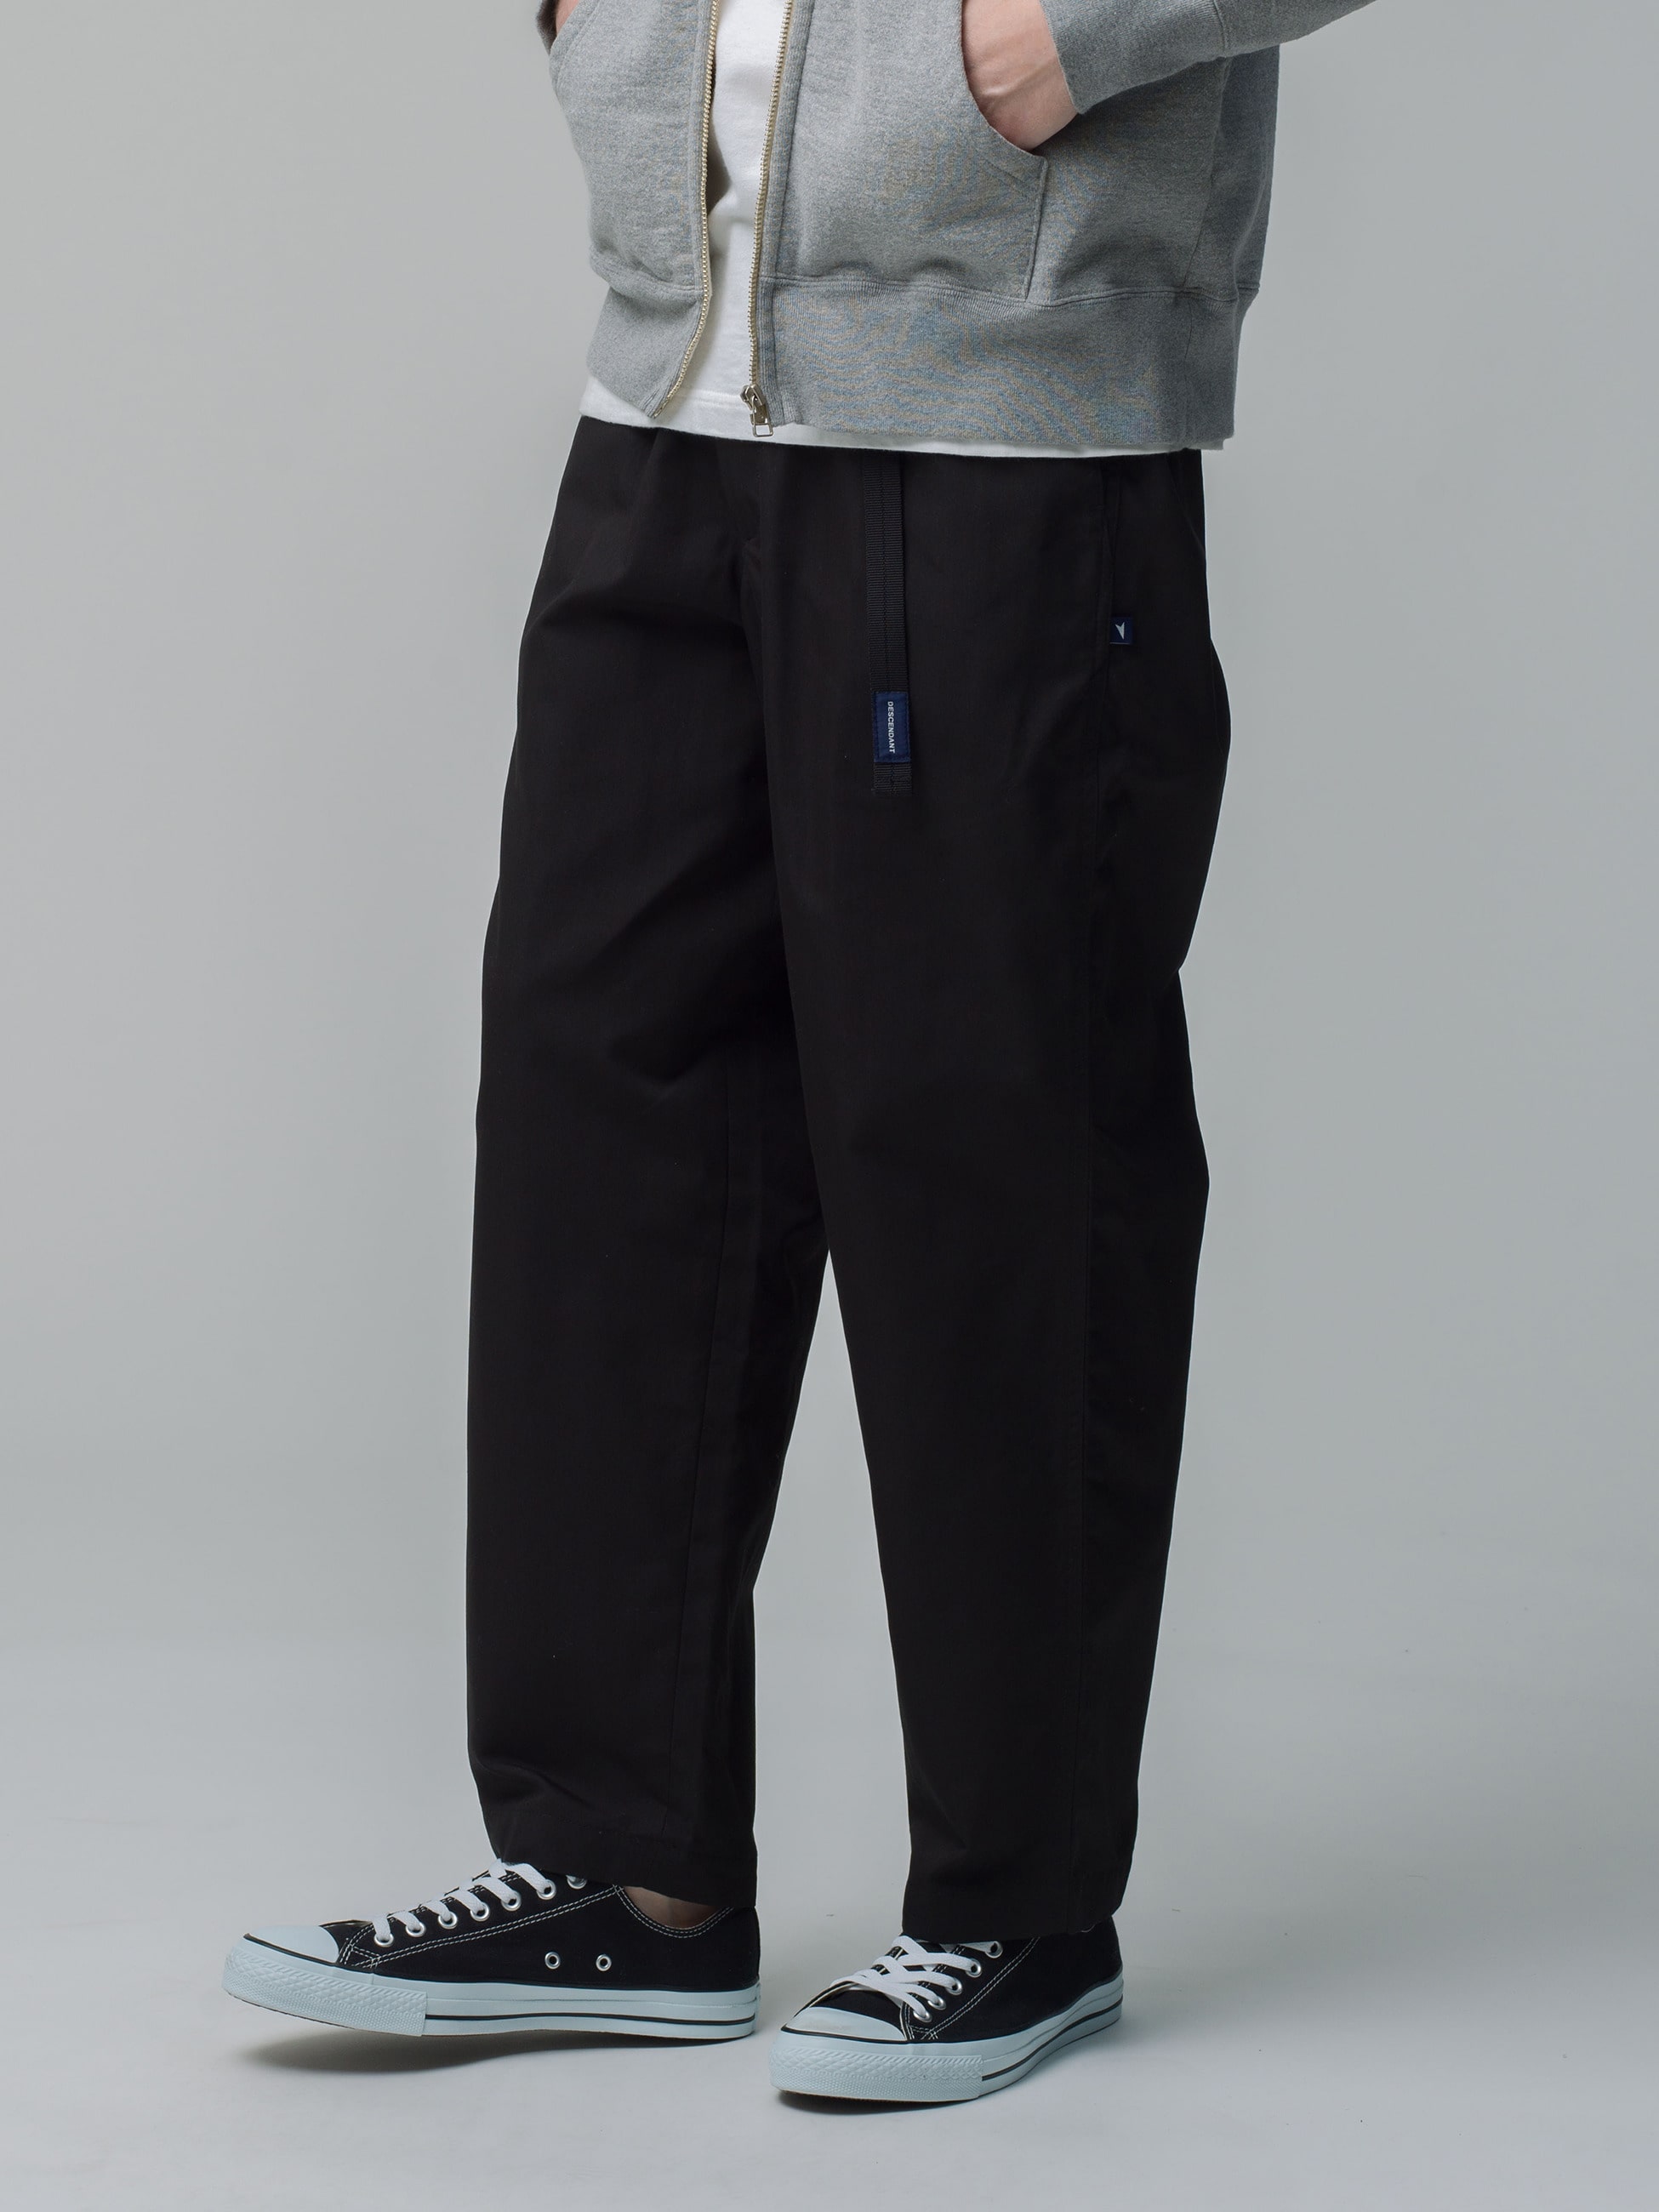 Clasp Oxford Pants｜DESCENDANT(ディセンダント)｜Ron Herman